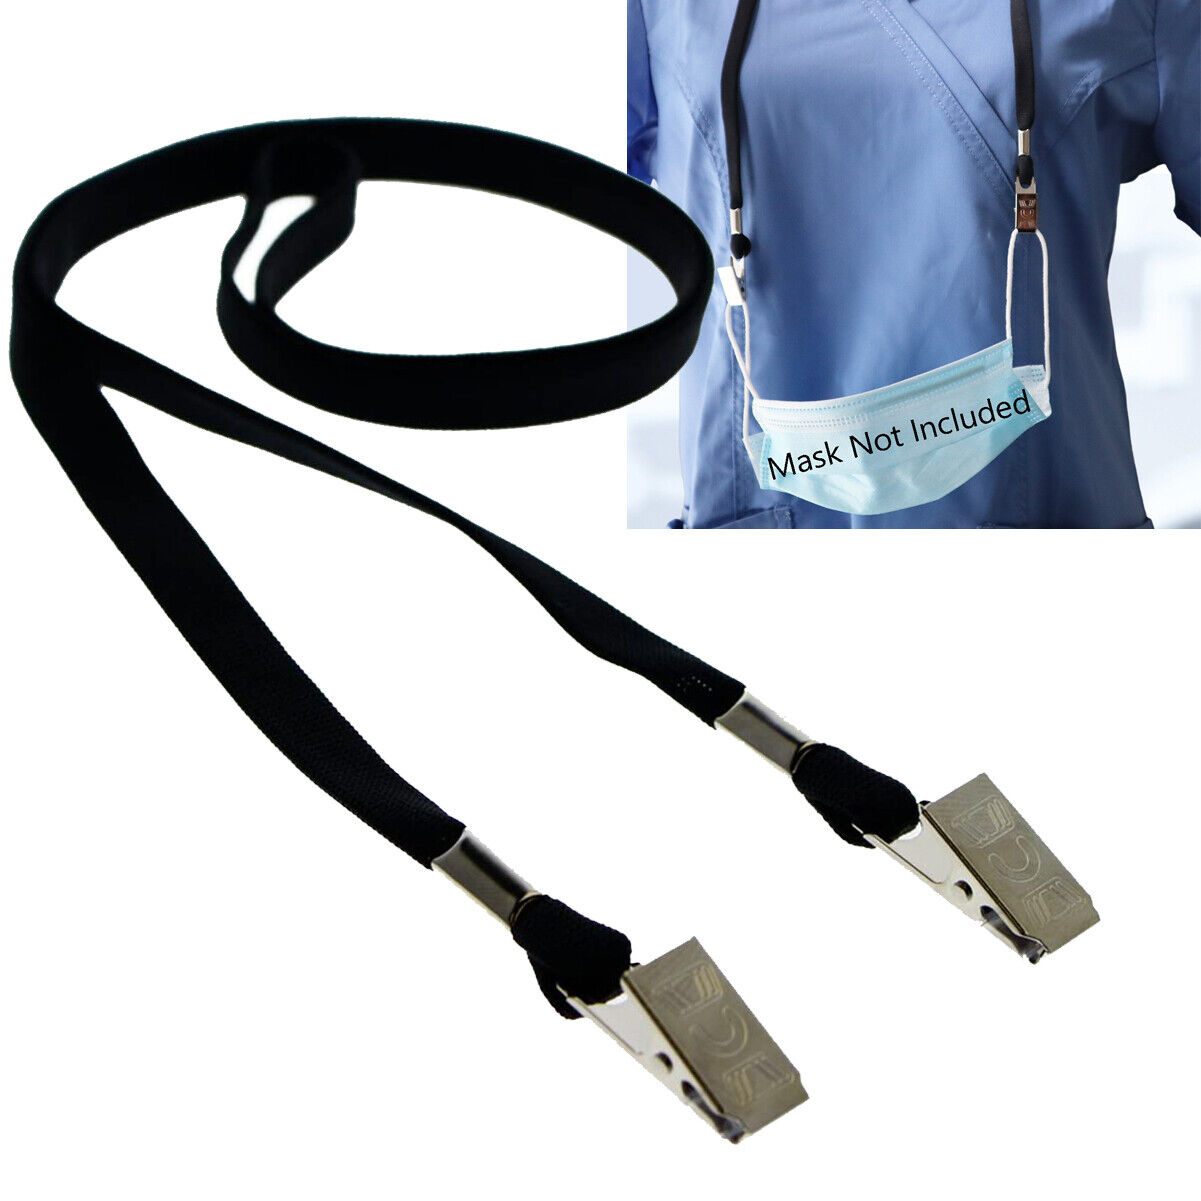 5 Pack - Face Mask Lanyards - Comfort Neck Straps with Two Bulldog Clips by SPID Specialist ID SPID-2350